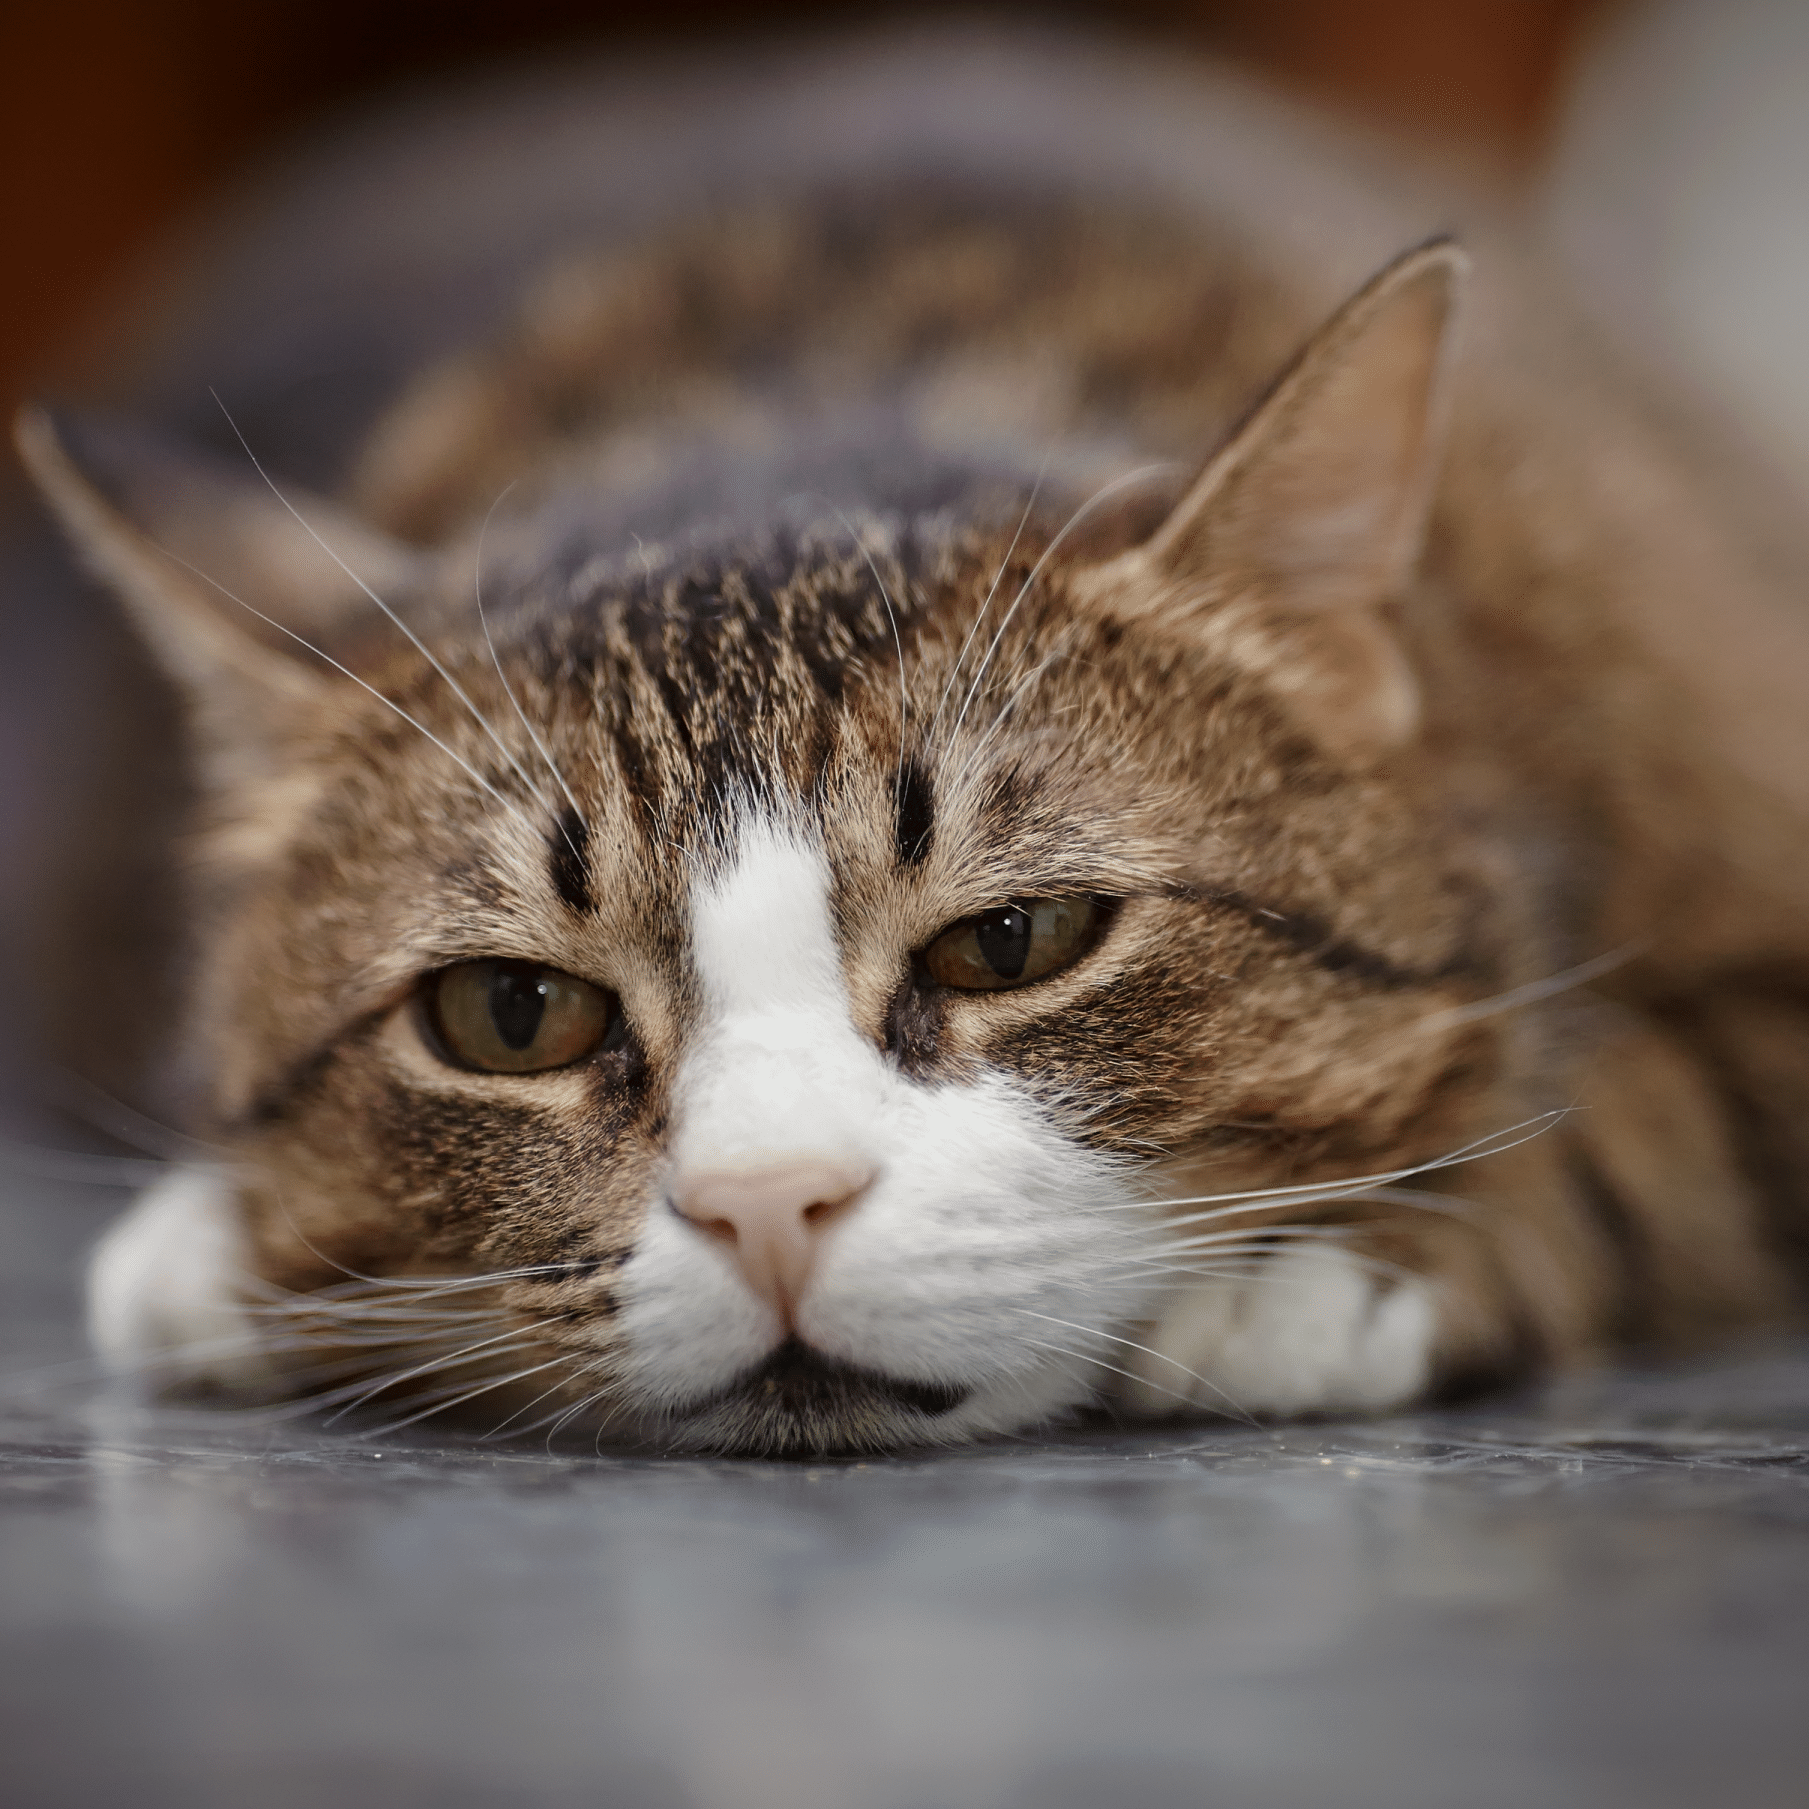 Thinking about cat euthanasia? Contact Local Vets today